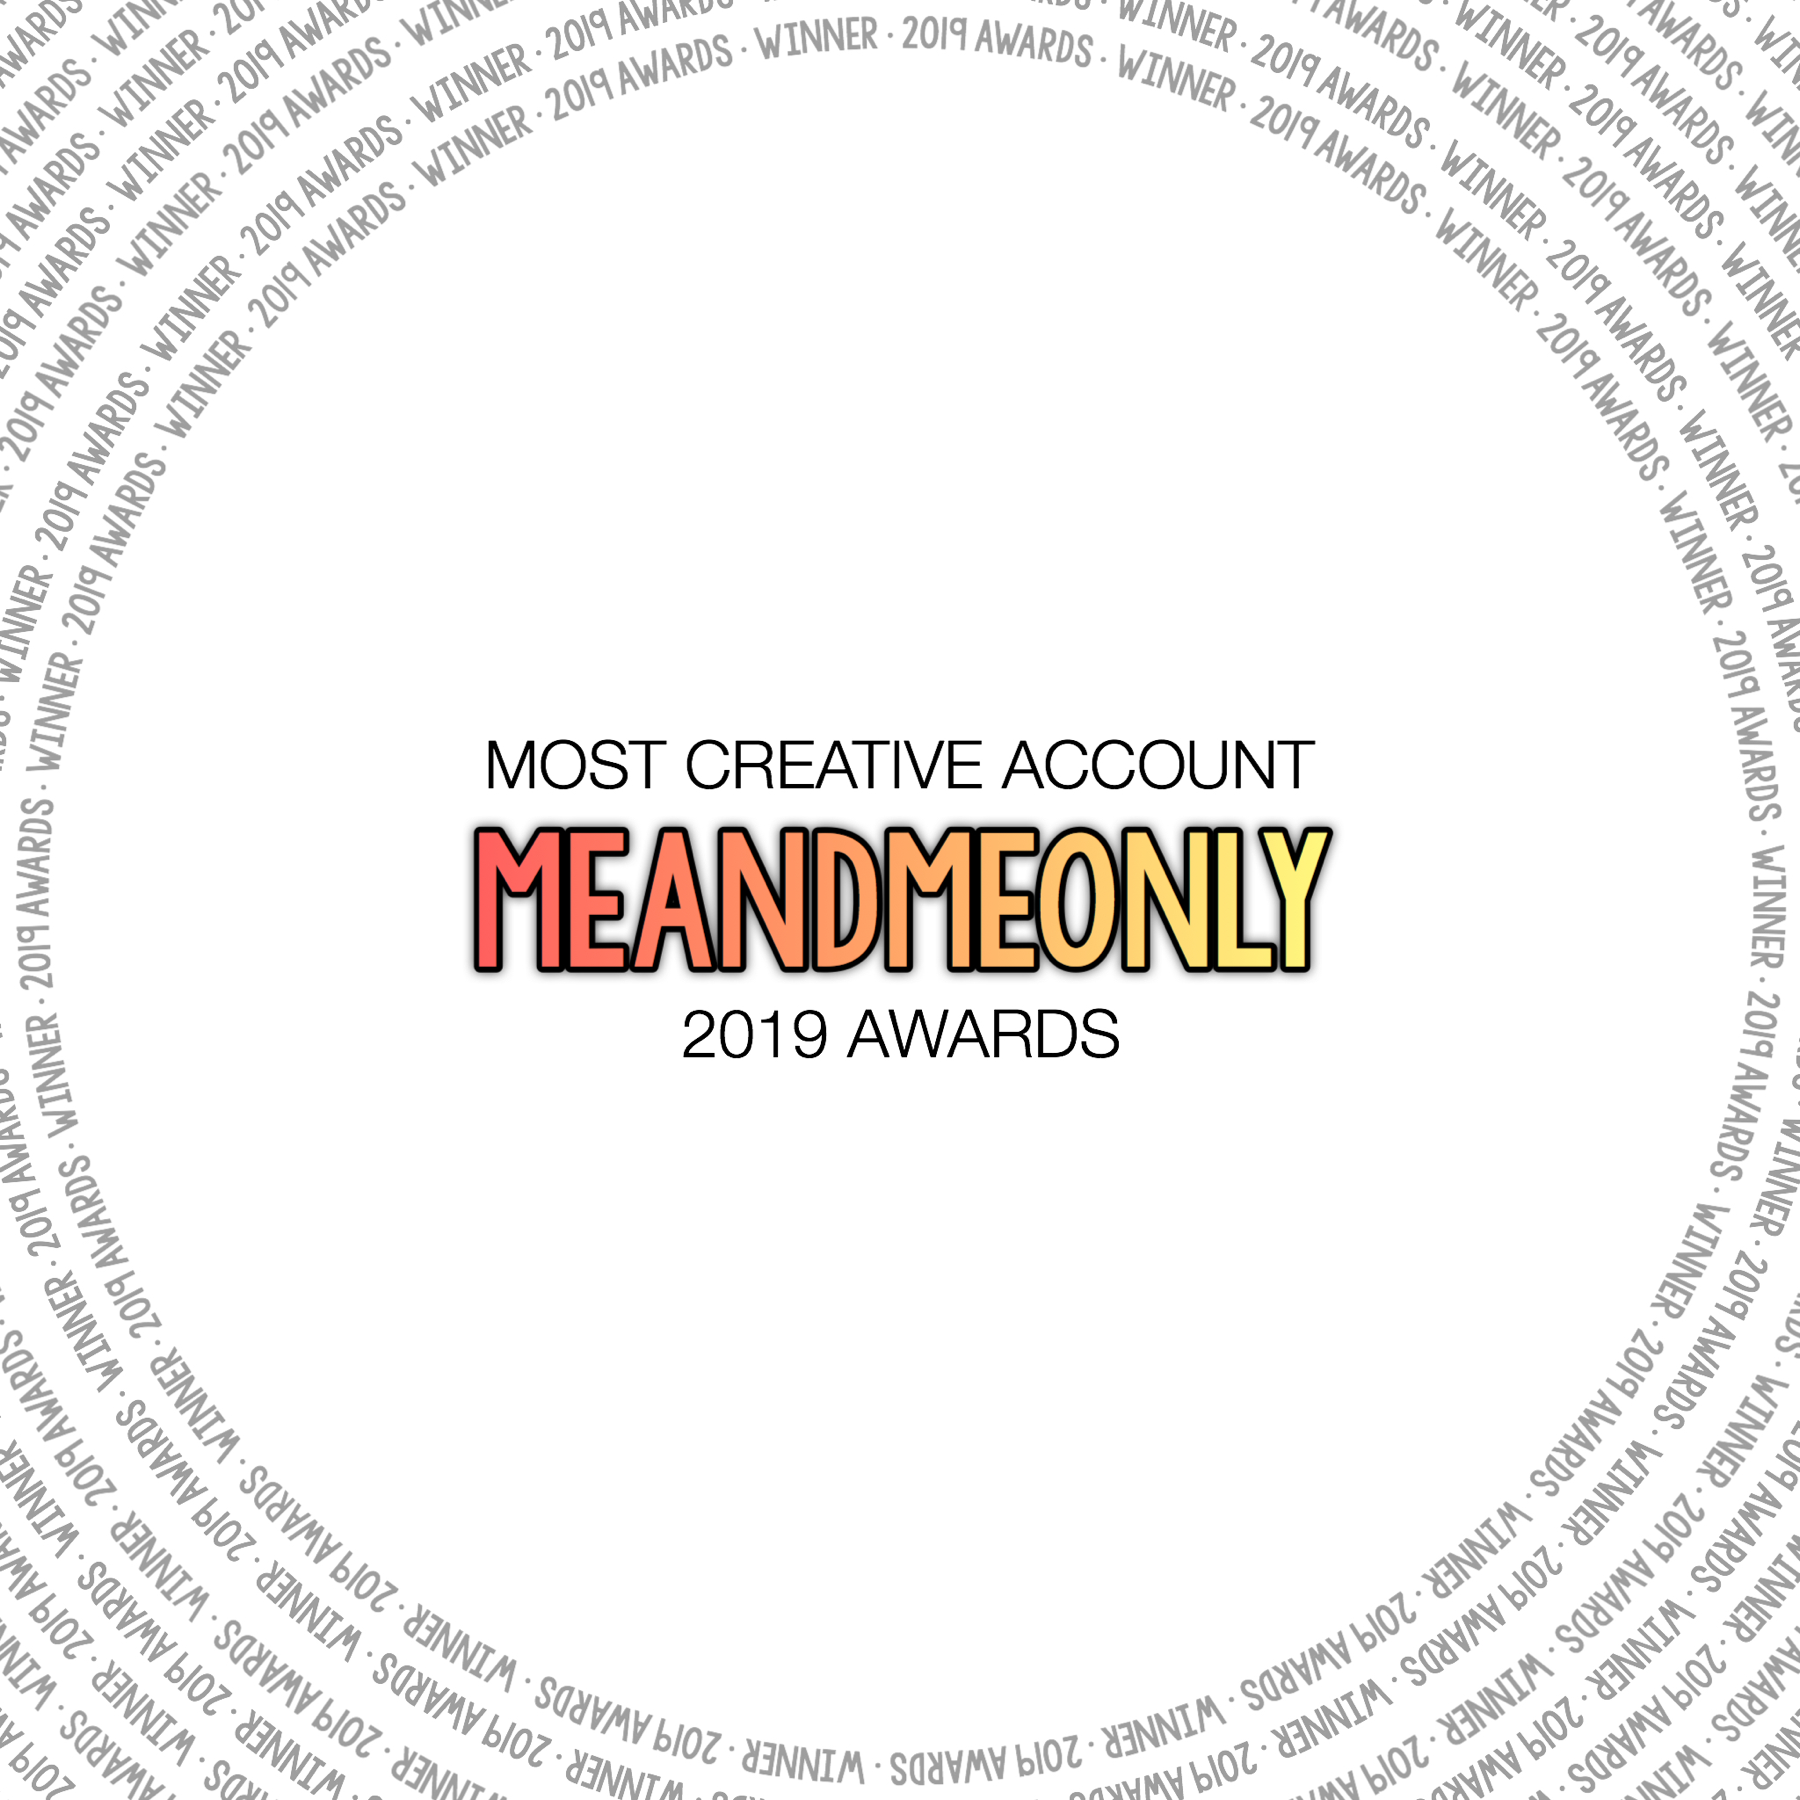 Congratulations @meandmeonly!

The vote count will be in the remixes